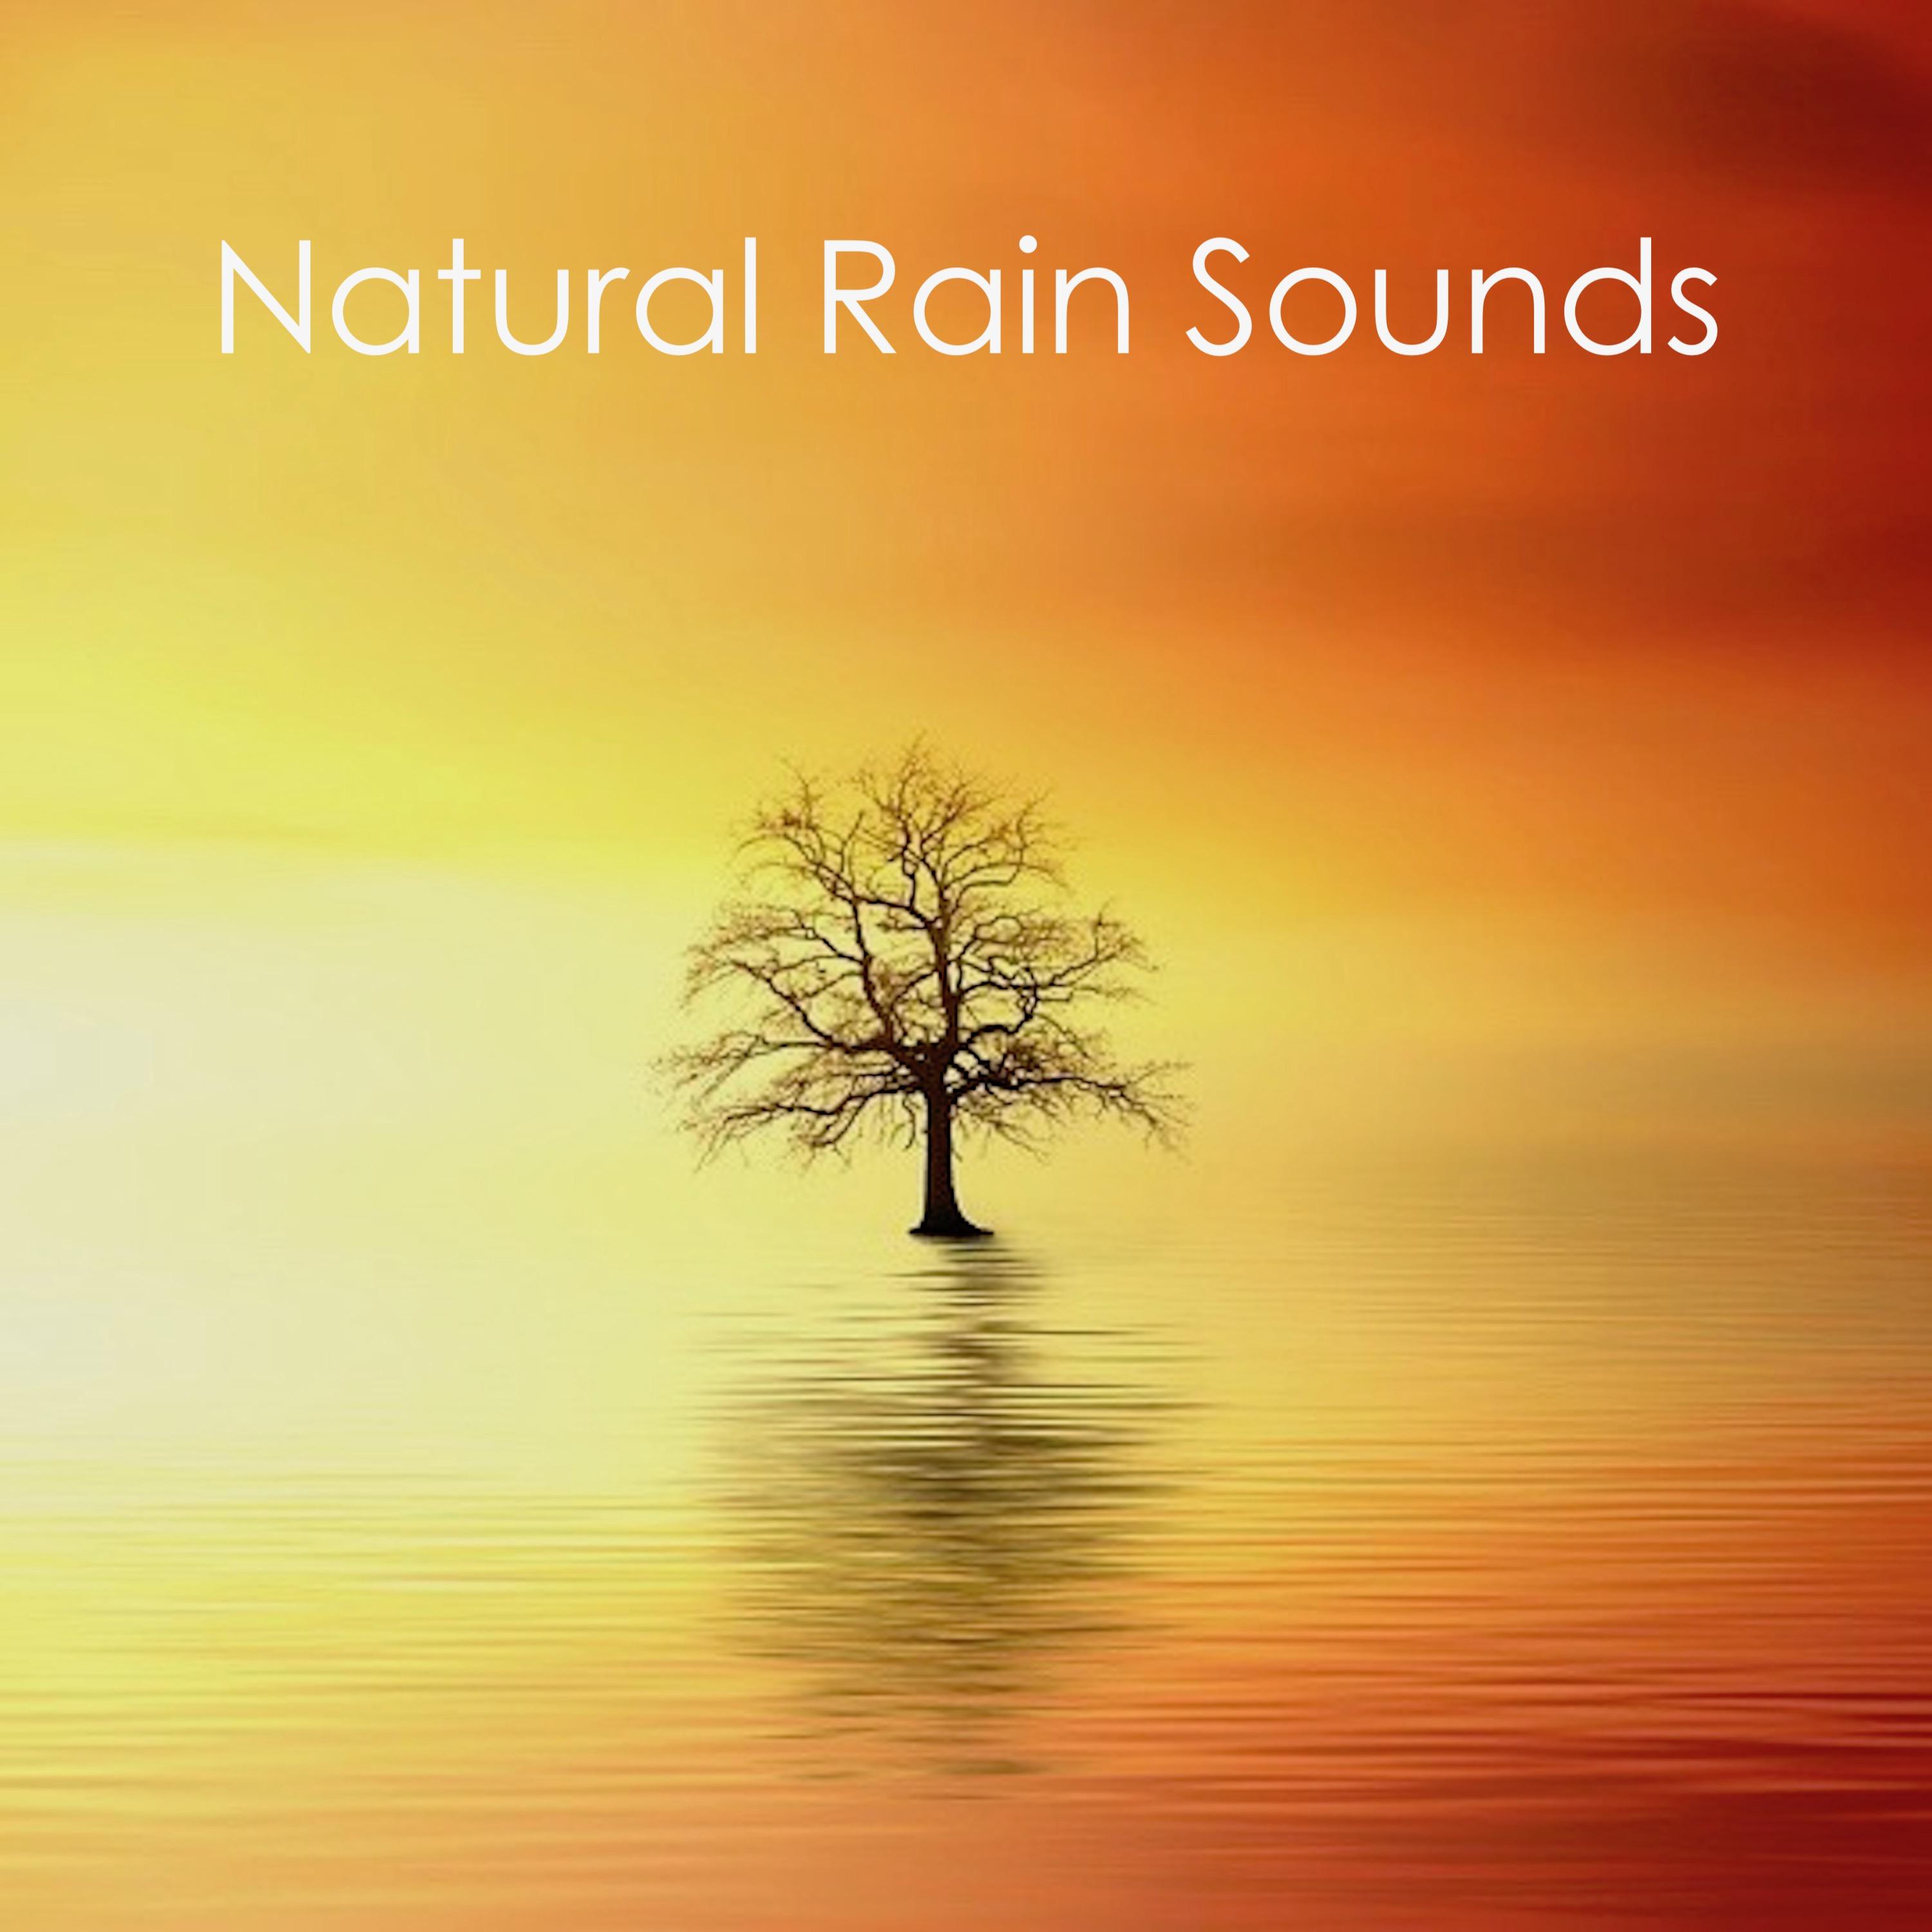 #17 Nature Rain Sounds for Sleep, Meditation and Yoga, Beat Insomnia, Sleep All Night, Anxiety, Study, Natural Sounds Loopable Rain Compilation